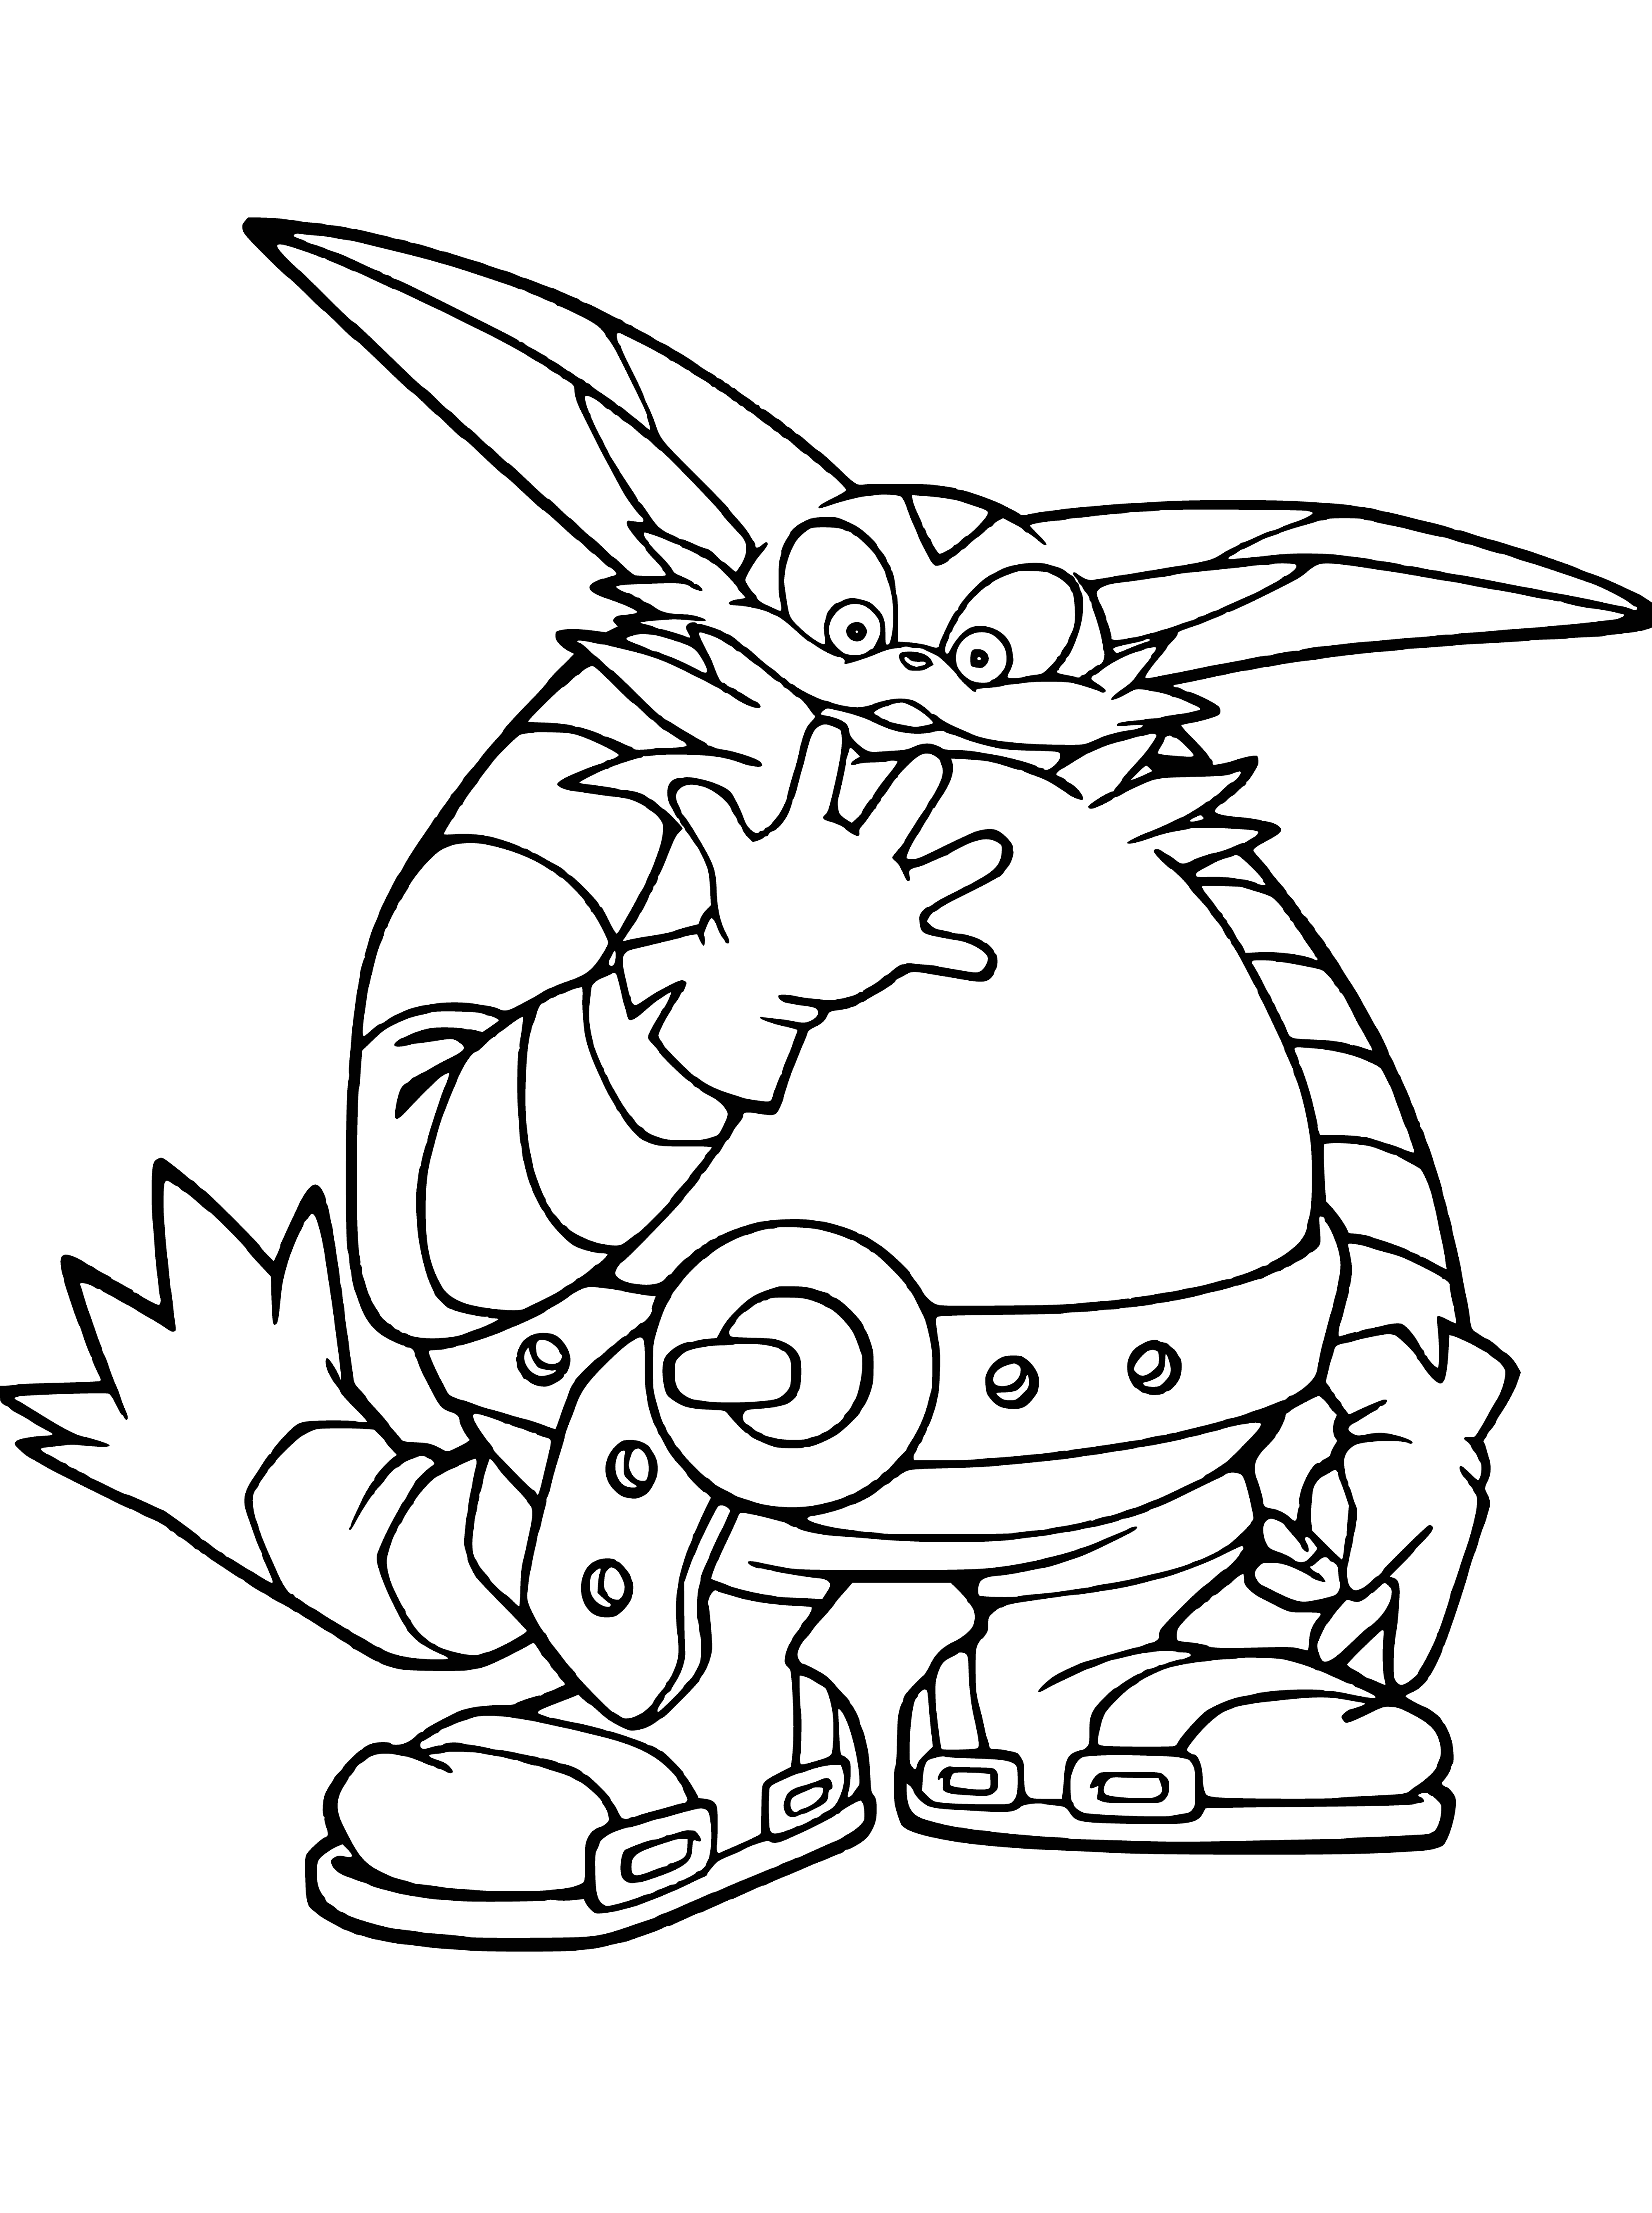 Big cat coloring page